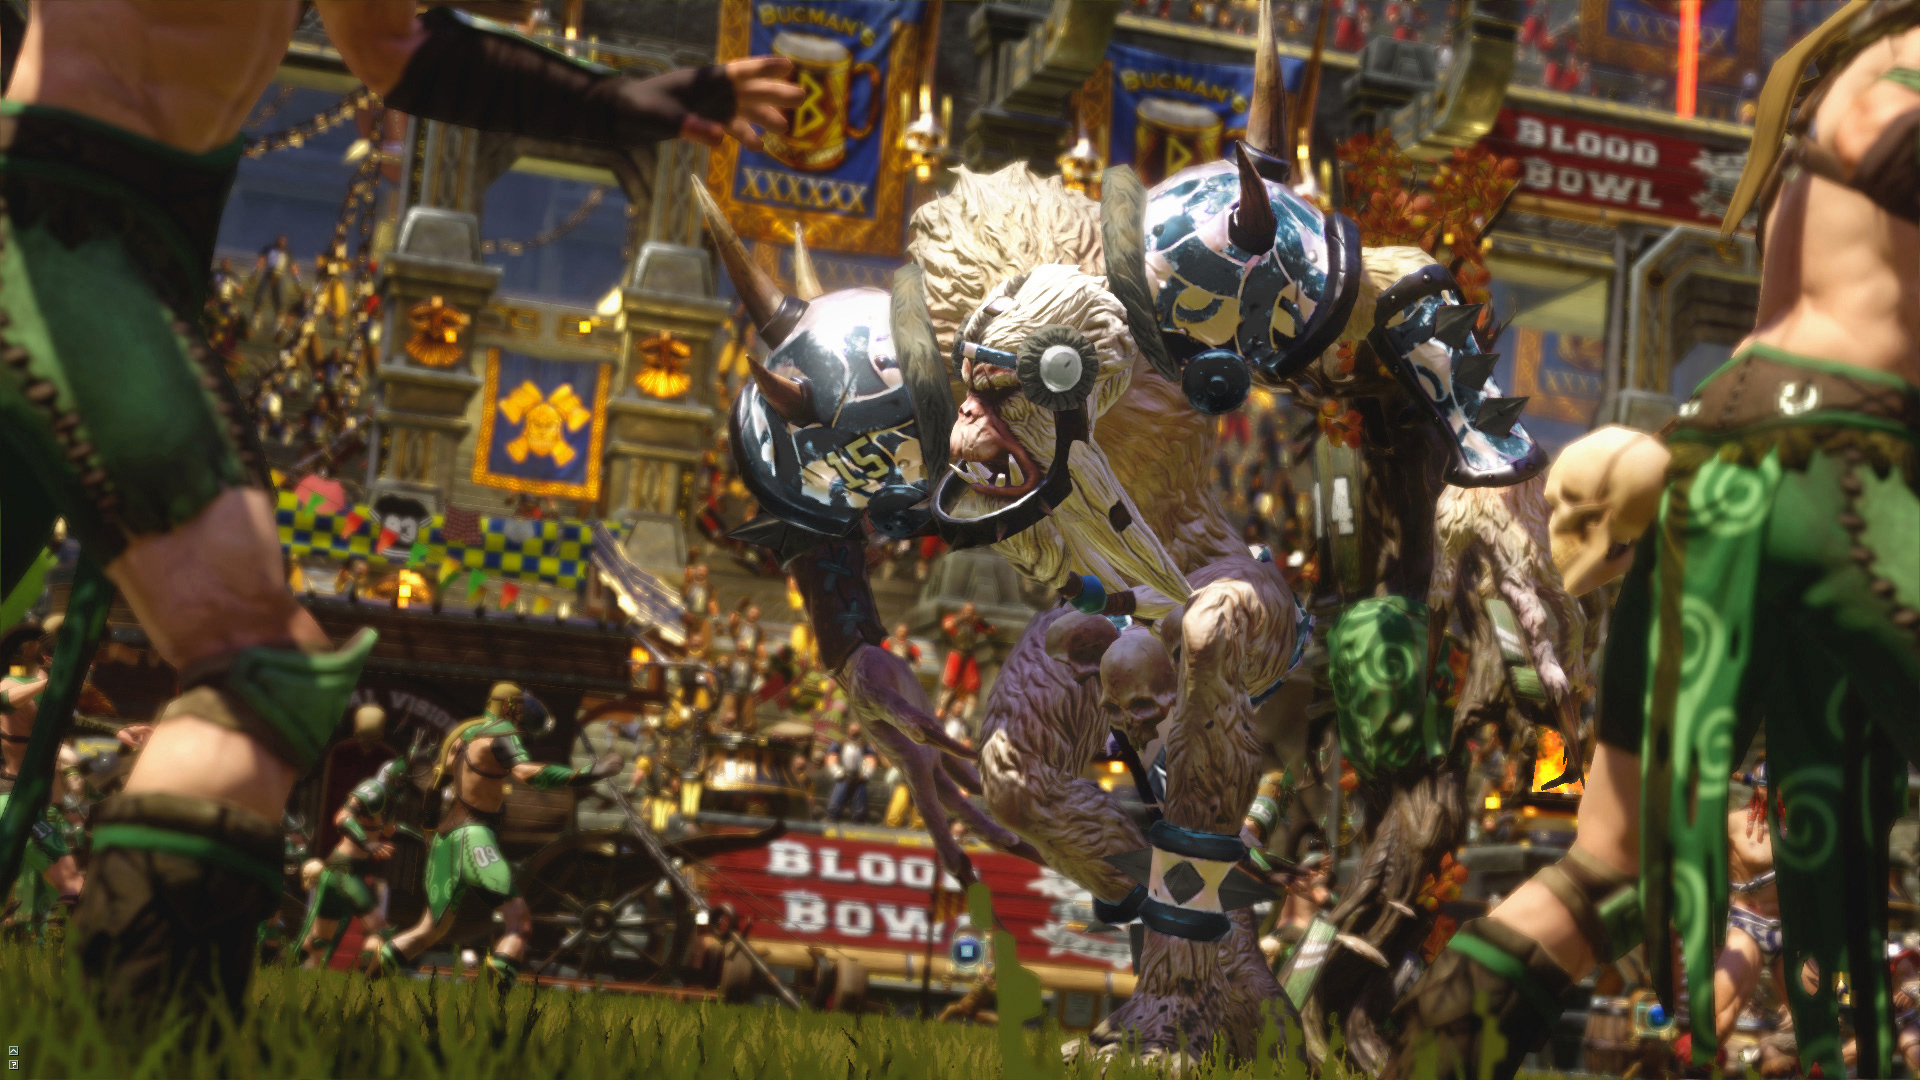 download blood bowl norse pitch